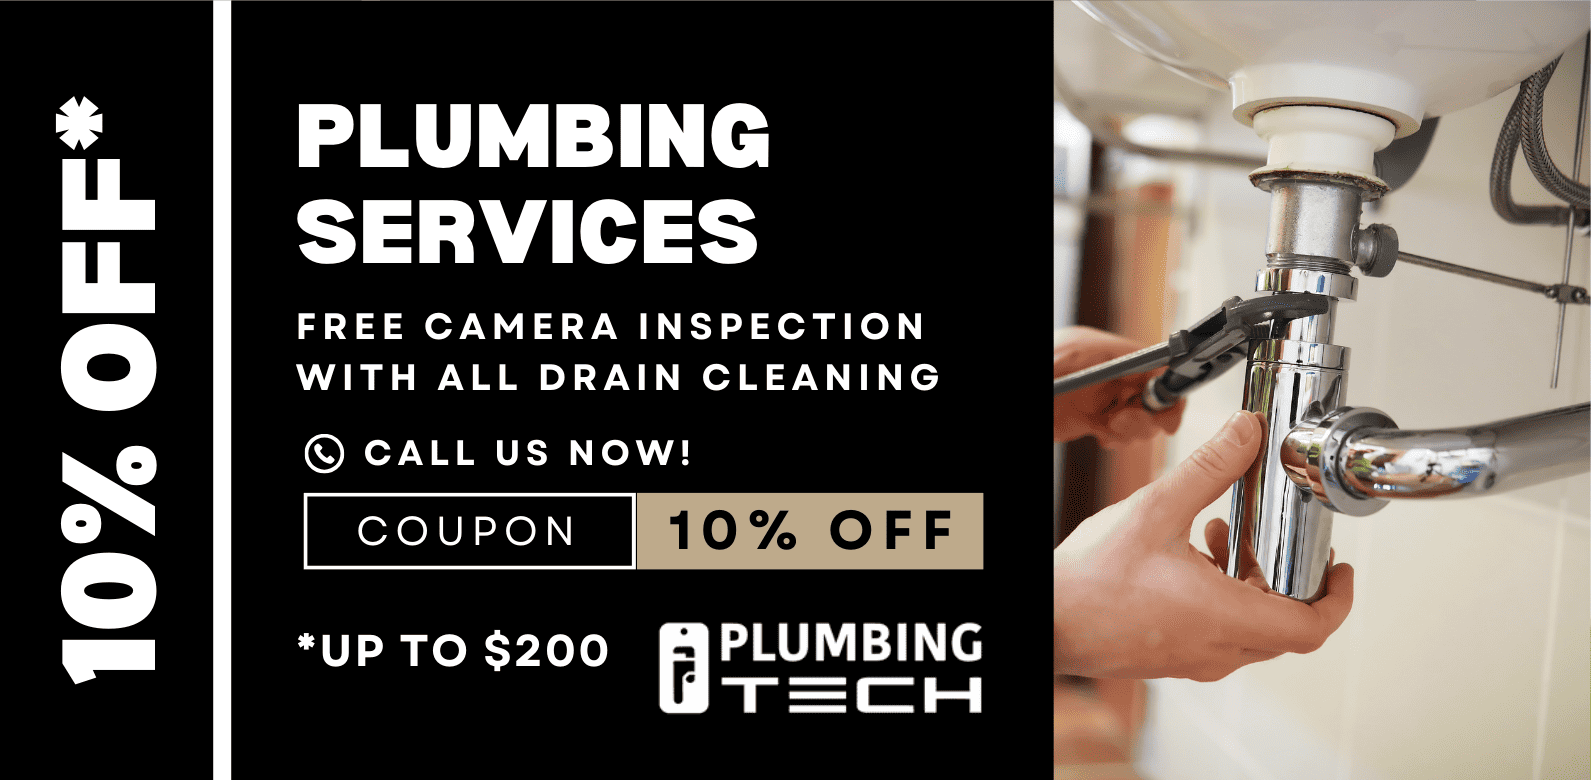 Plumbing Services Coupon